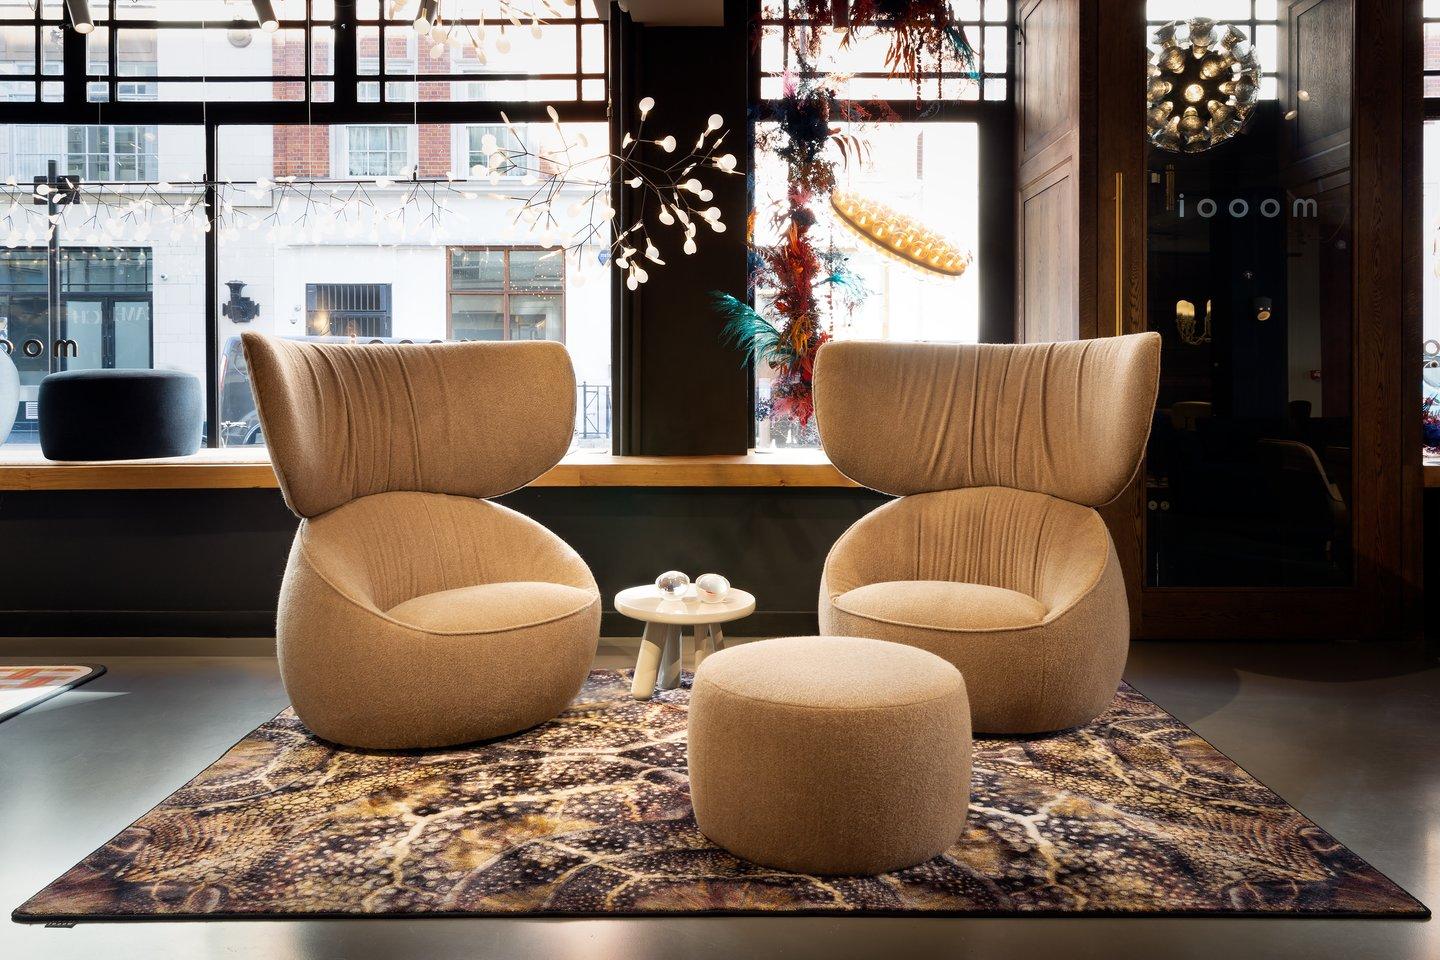 Moooi Pooof Large Pouf in Tonica 2, 171 White Upholstery In New Condition For Sale In Brooklyn, NY